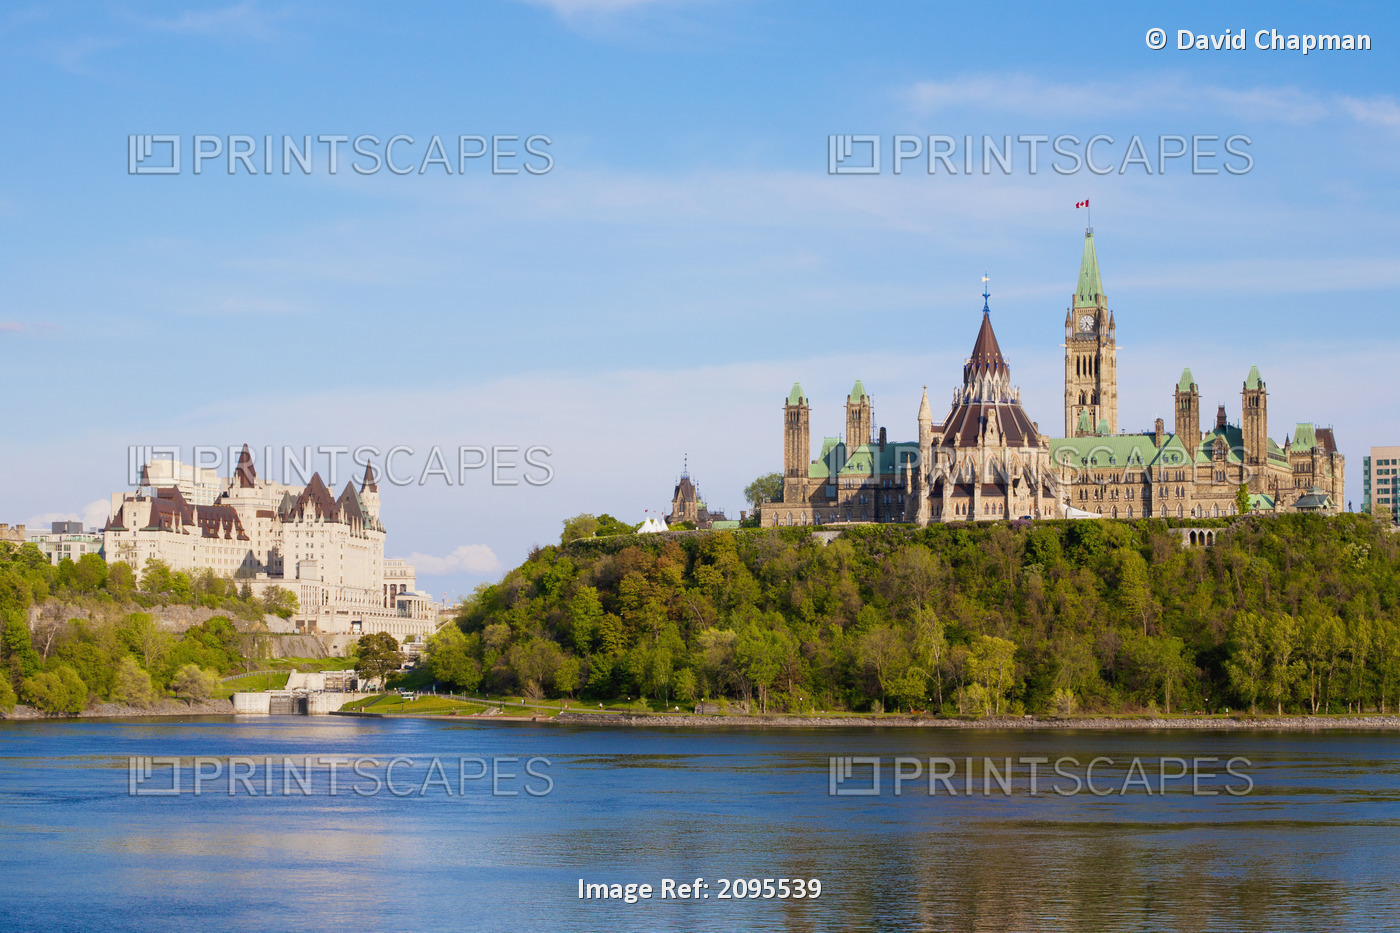 Parliament Buildings And The Fairmont Chateau Laurier; Ottawa Ontario Canada